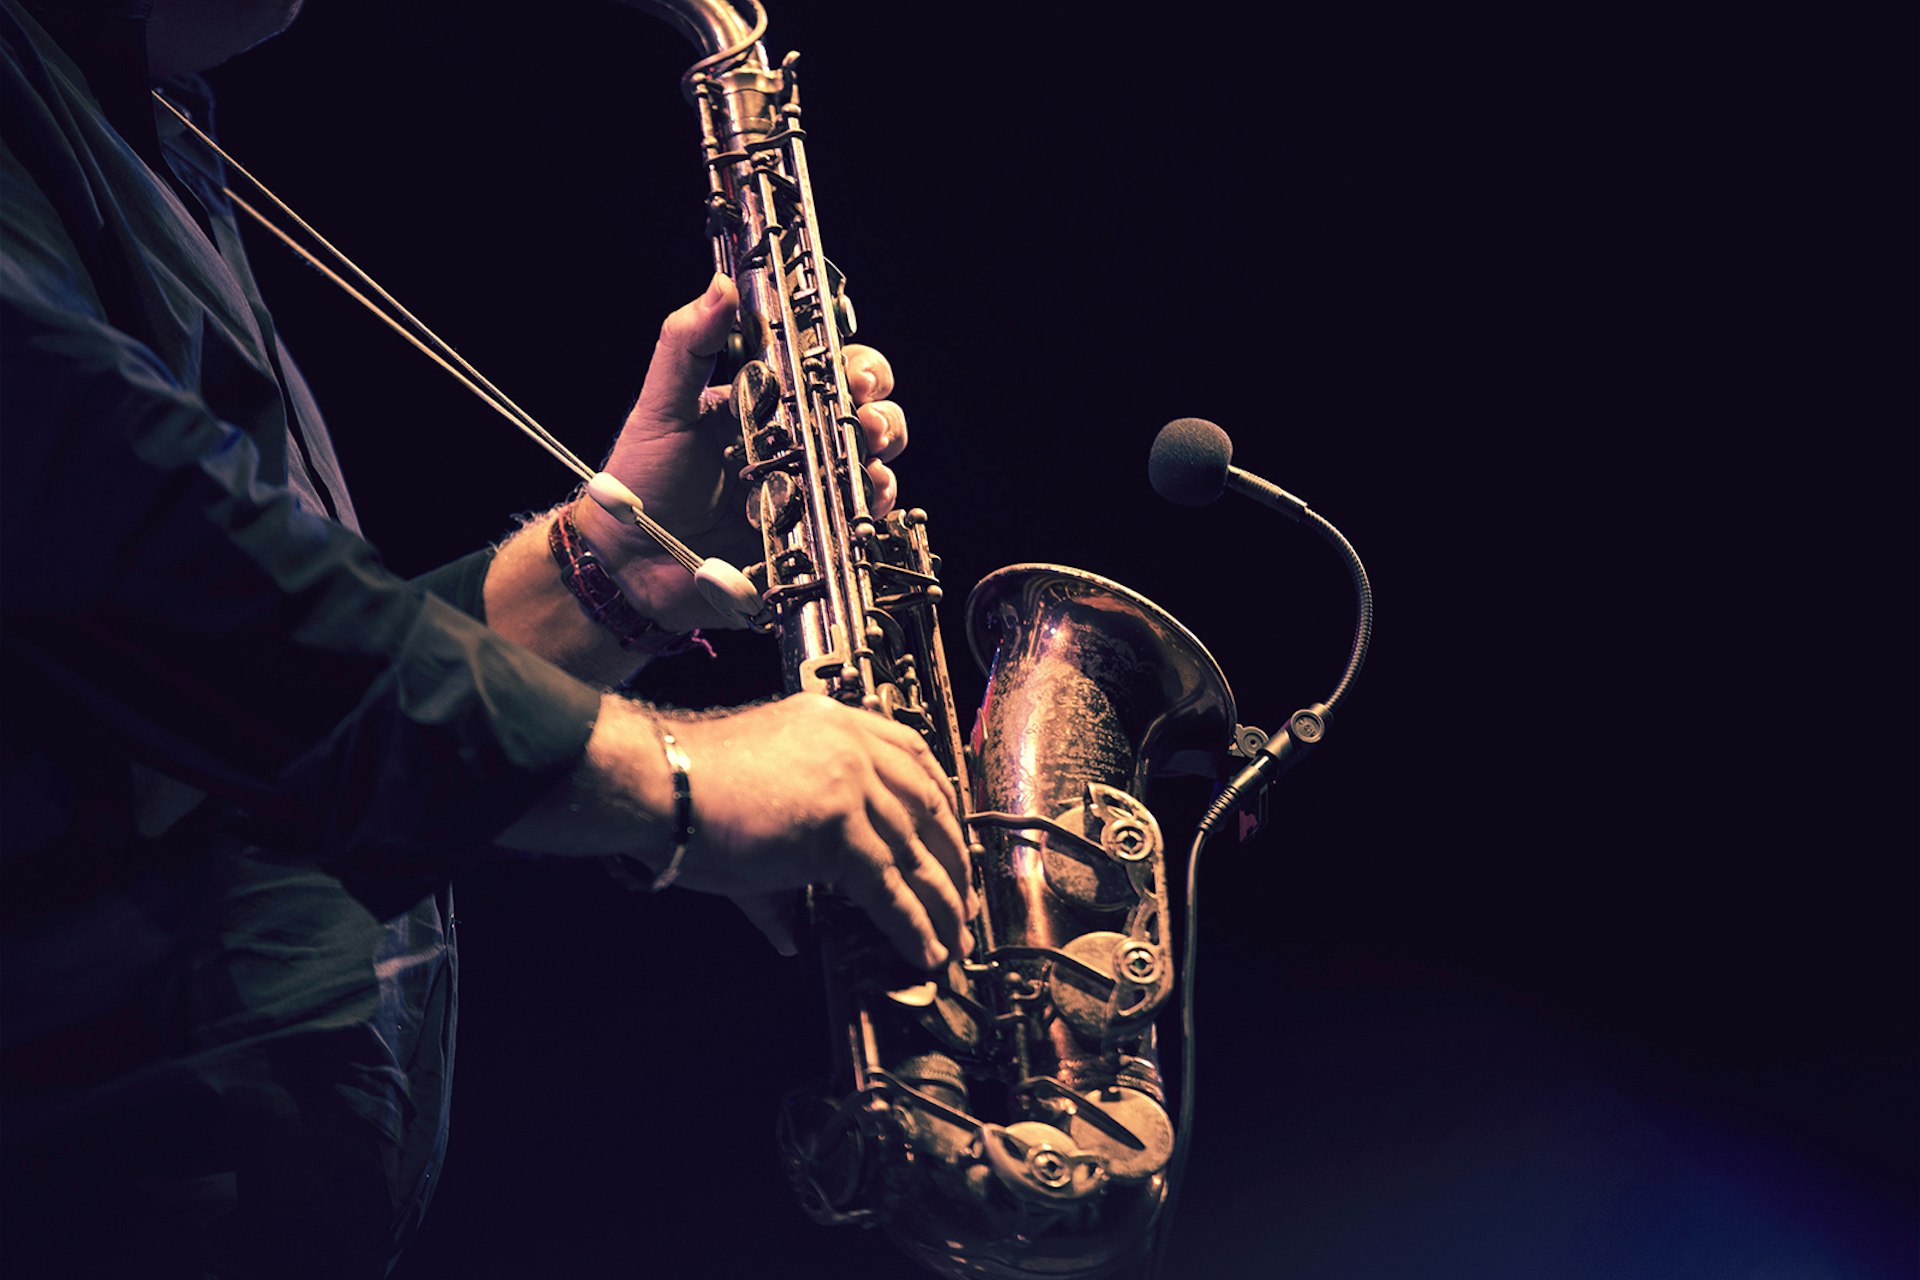 A close-up of a saxophone as a man plays it